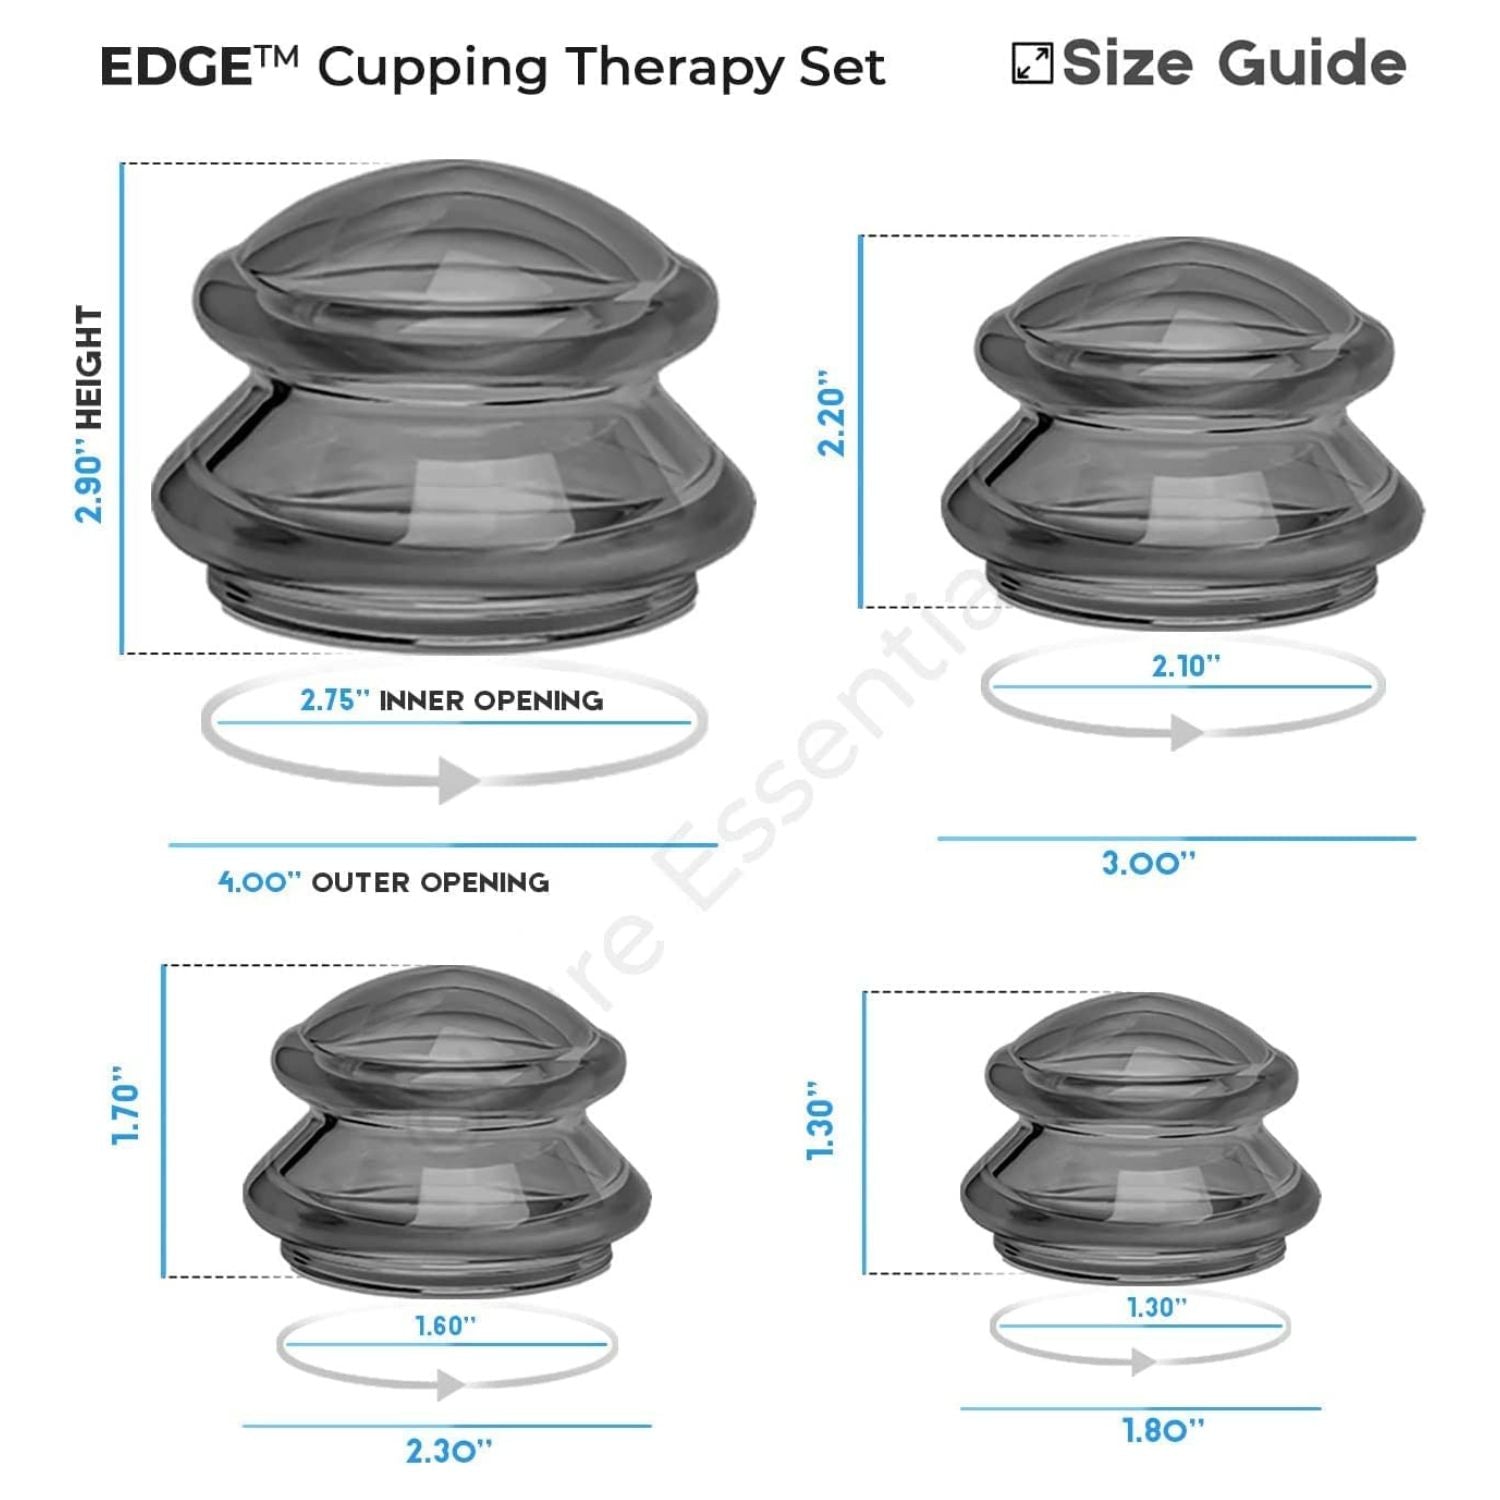 LURE Essentials Edge Cupping Therapy Set - Silicone Kenya